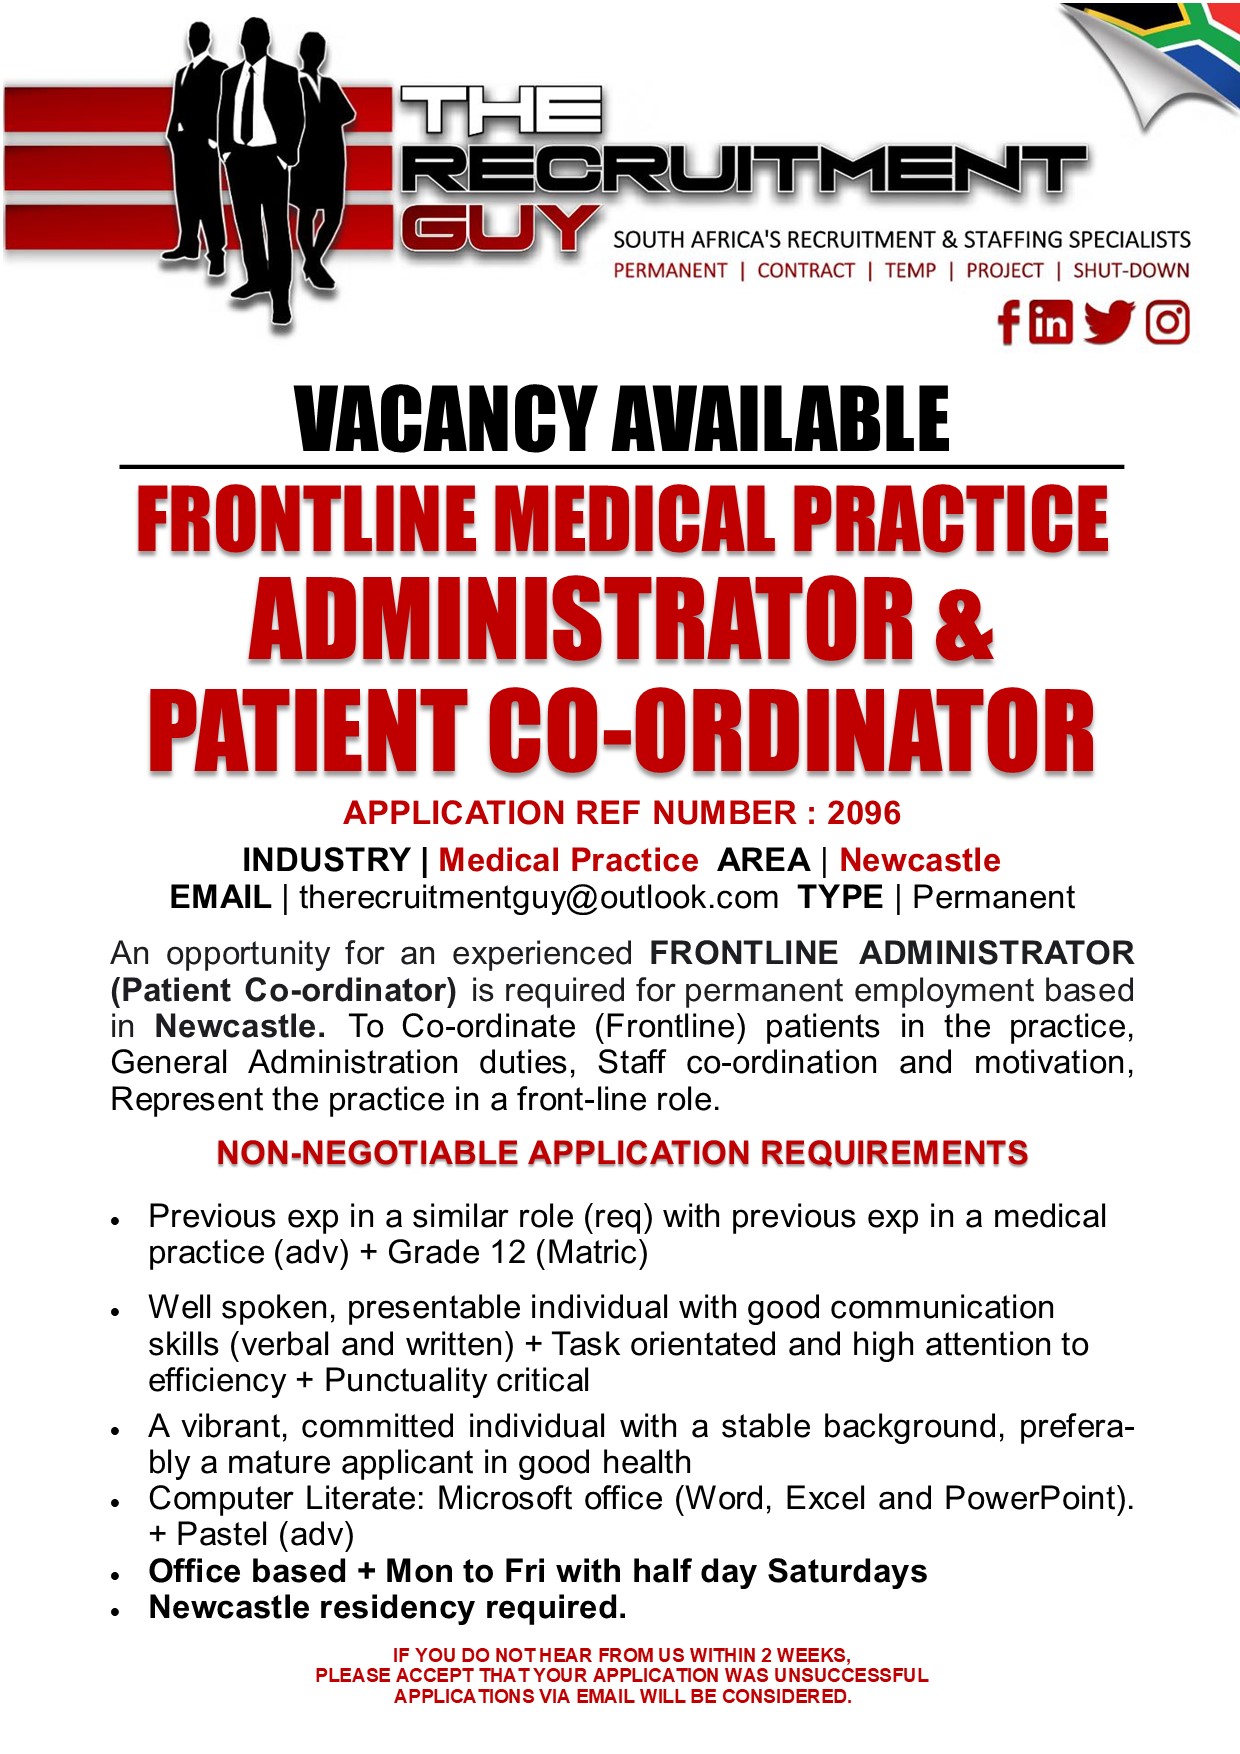 GUY SOUTH AFRICA'S RECRUITMENT &amp; STAFFING SPECIALISTS

PERMANENT | CONTRACT | TEMP | PROJECT | SHUT-DOWN

fBYE
VACANCY AVAILABLE
FRONTLINE MEDICAL PRACTICE

ADMINISTRATOR &amp;
PATIENT CO-ORDINATOR

APPLICATION REF NUMBER : 2096

INDUSTRY | Medical Practice AREA | Newcastle
EMAIL | therecruitmentguy@outlook.com TYPE | Permanent

An opportunity for an experienced FRONTLINE ADMINISTRATOR
(Patient Co-ordinator) is required for permanent employment based
in Newcastle. To Co-ordinate (Frontline) patients in the practice,
General Administration duties, Staff co-ordination and motivation,
Represent the practice in a front-line role.

NON-NEGOTIABLE APPLICATION REQUIREMENTS

 

+ Previous exp in a similar role (req) with previous exp in a medical
practice (adv) + Grade 12 (Matric)

+ Well spoken, presentable individual with good communication
skills (verbal and written) + Task orientated and high attention to
efficiency + Punctuality critical

« A vibrant, committed individual with a stable background, prefera-
bly a mature applicant in good health
« Computer Literate: Microsoft office (Word, Excel and PowerPoint).
+ Pastel (adv)
. Office based + Mon to Fri with half day Saturdays
. Newcastle residency required.
IF YOU DO NOT HEAR FROM US WITHIN 2 WEEKS,

PLEASE ACCEPT THAT YOUR APPLICATION WAS UNSUCCESSFUL
APPLICATIONS VIA EMAIL WILL BE CONSIDERED.